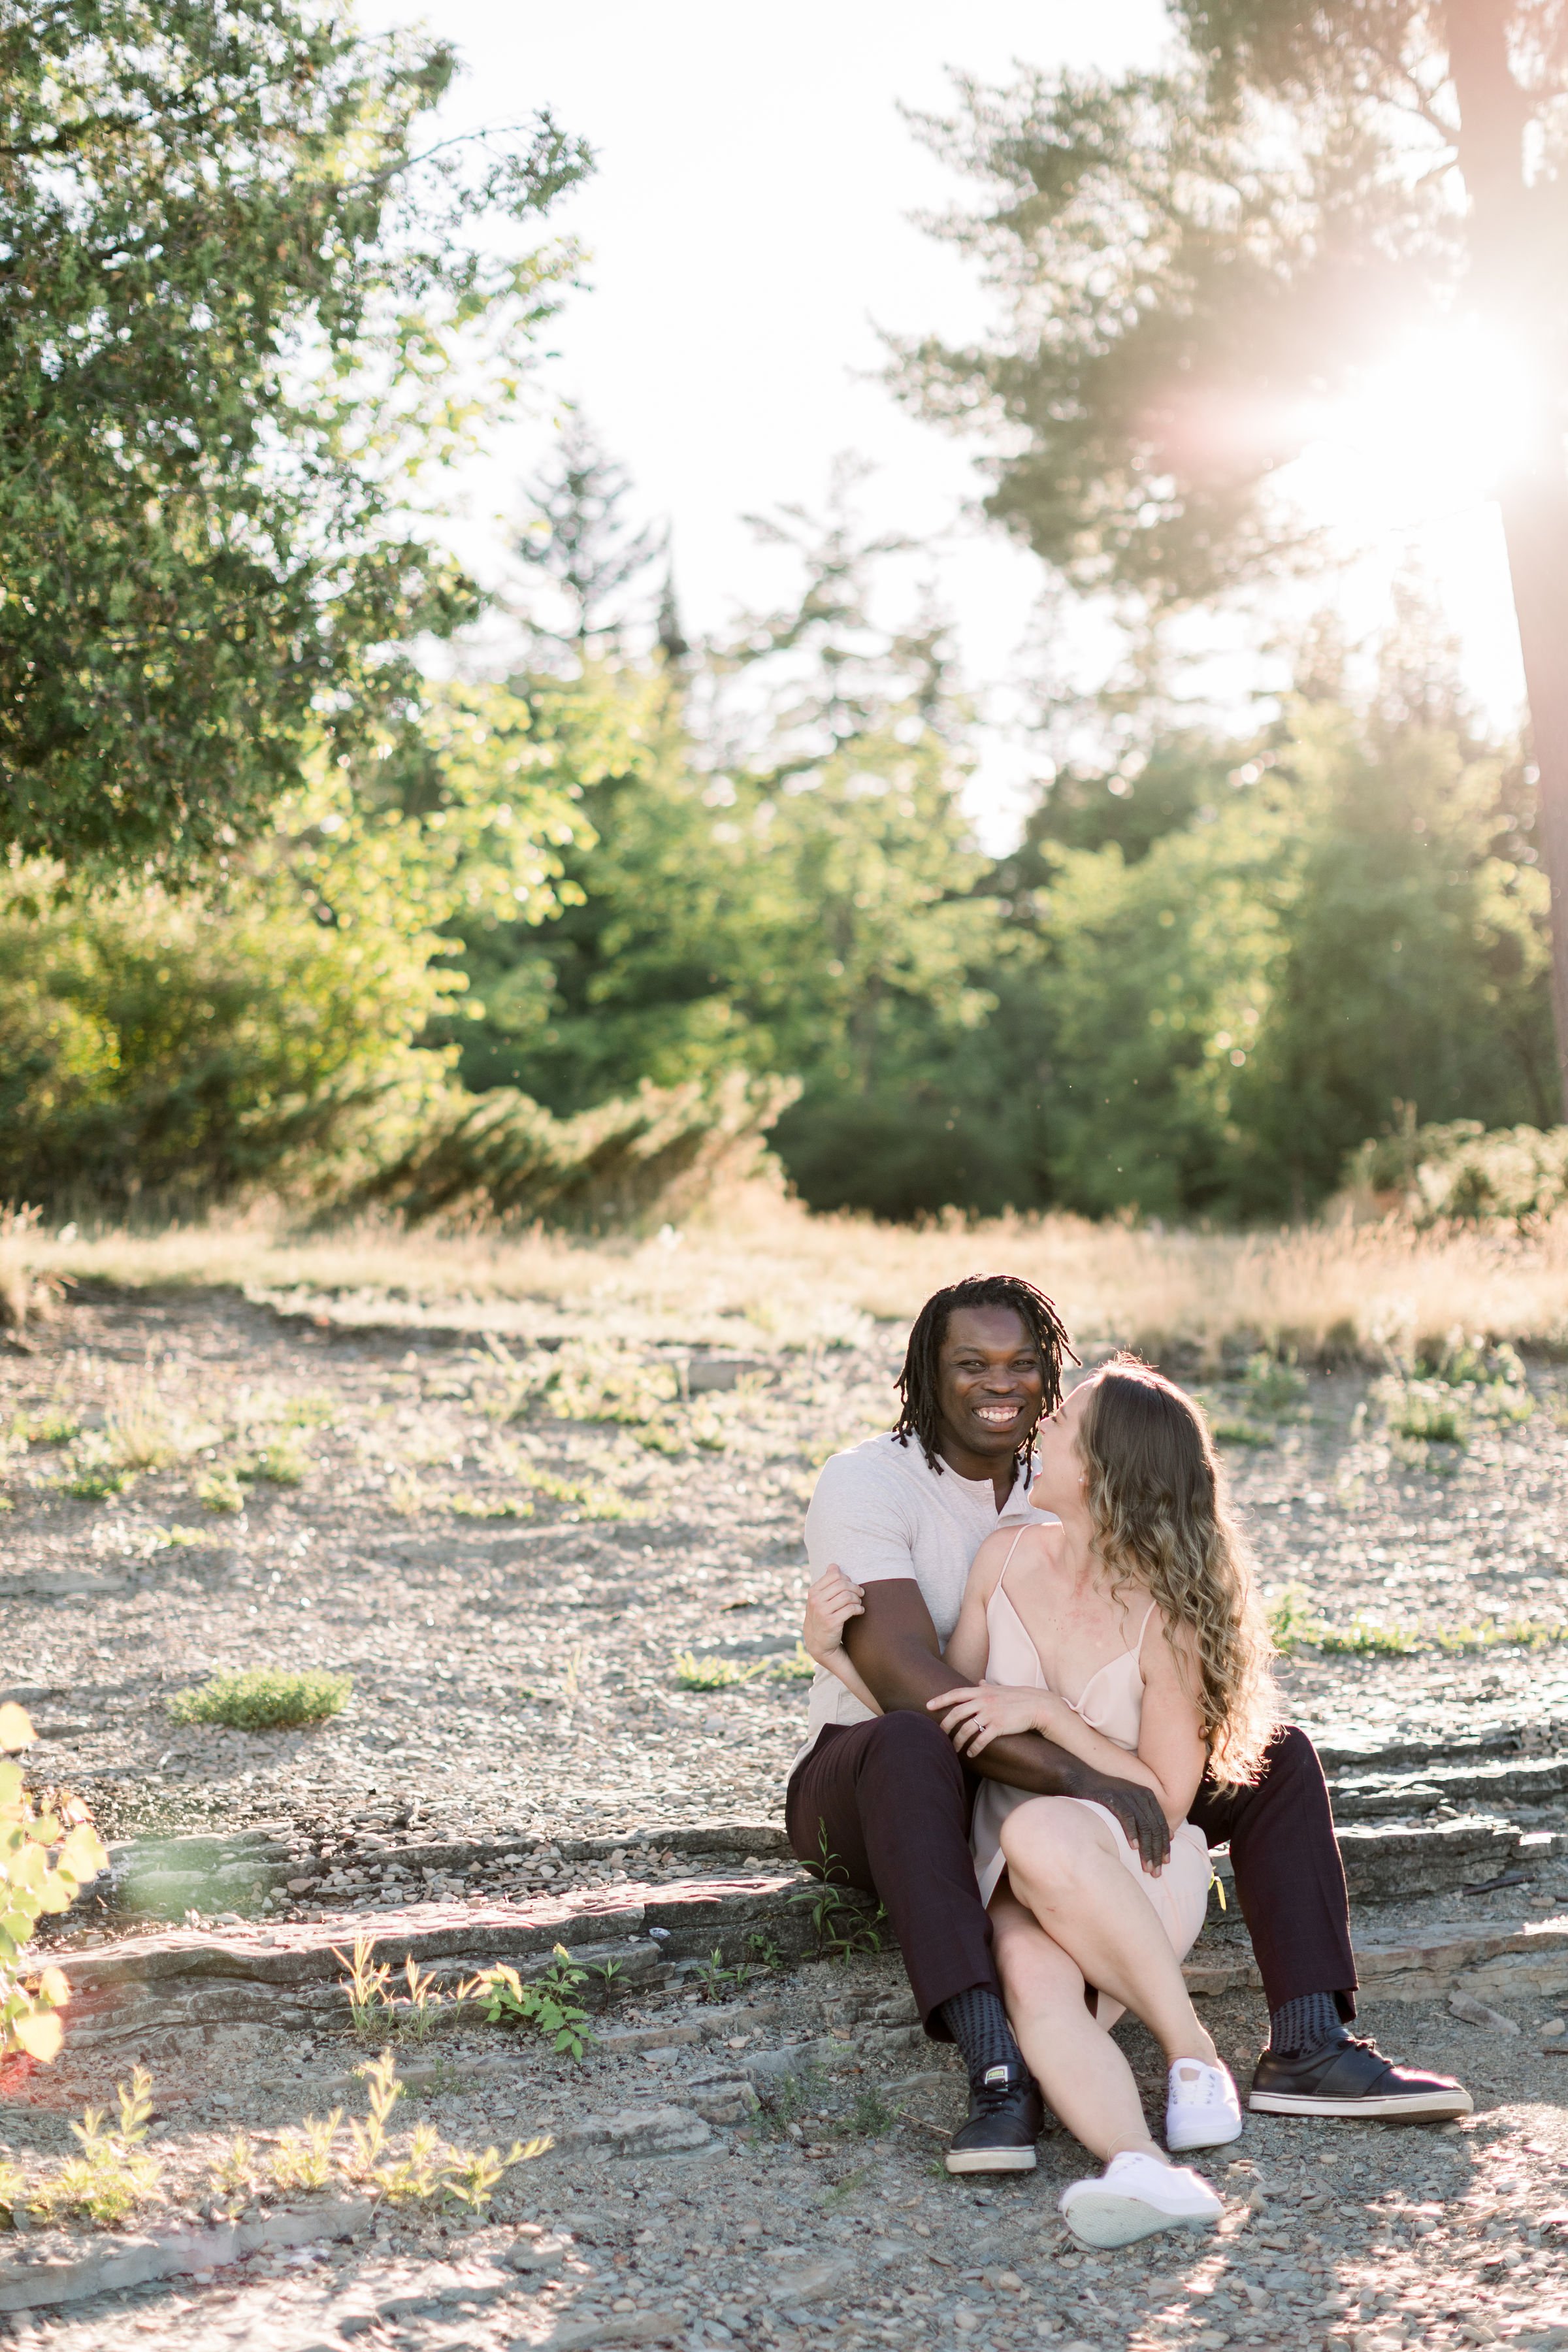  At Pinhey's Point at sunset fiances hold each other tight and smile by Chelsea Mason Photography. Pinhey's Point photography #Chelseamasonphotography #Chelseamasonengagements #Onatarioengagements #Pinhey'sPoint #Ontarioweddingphotographers 